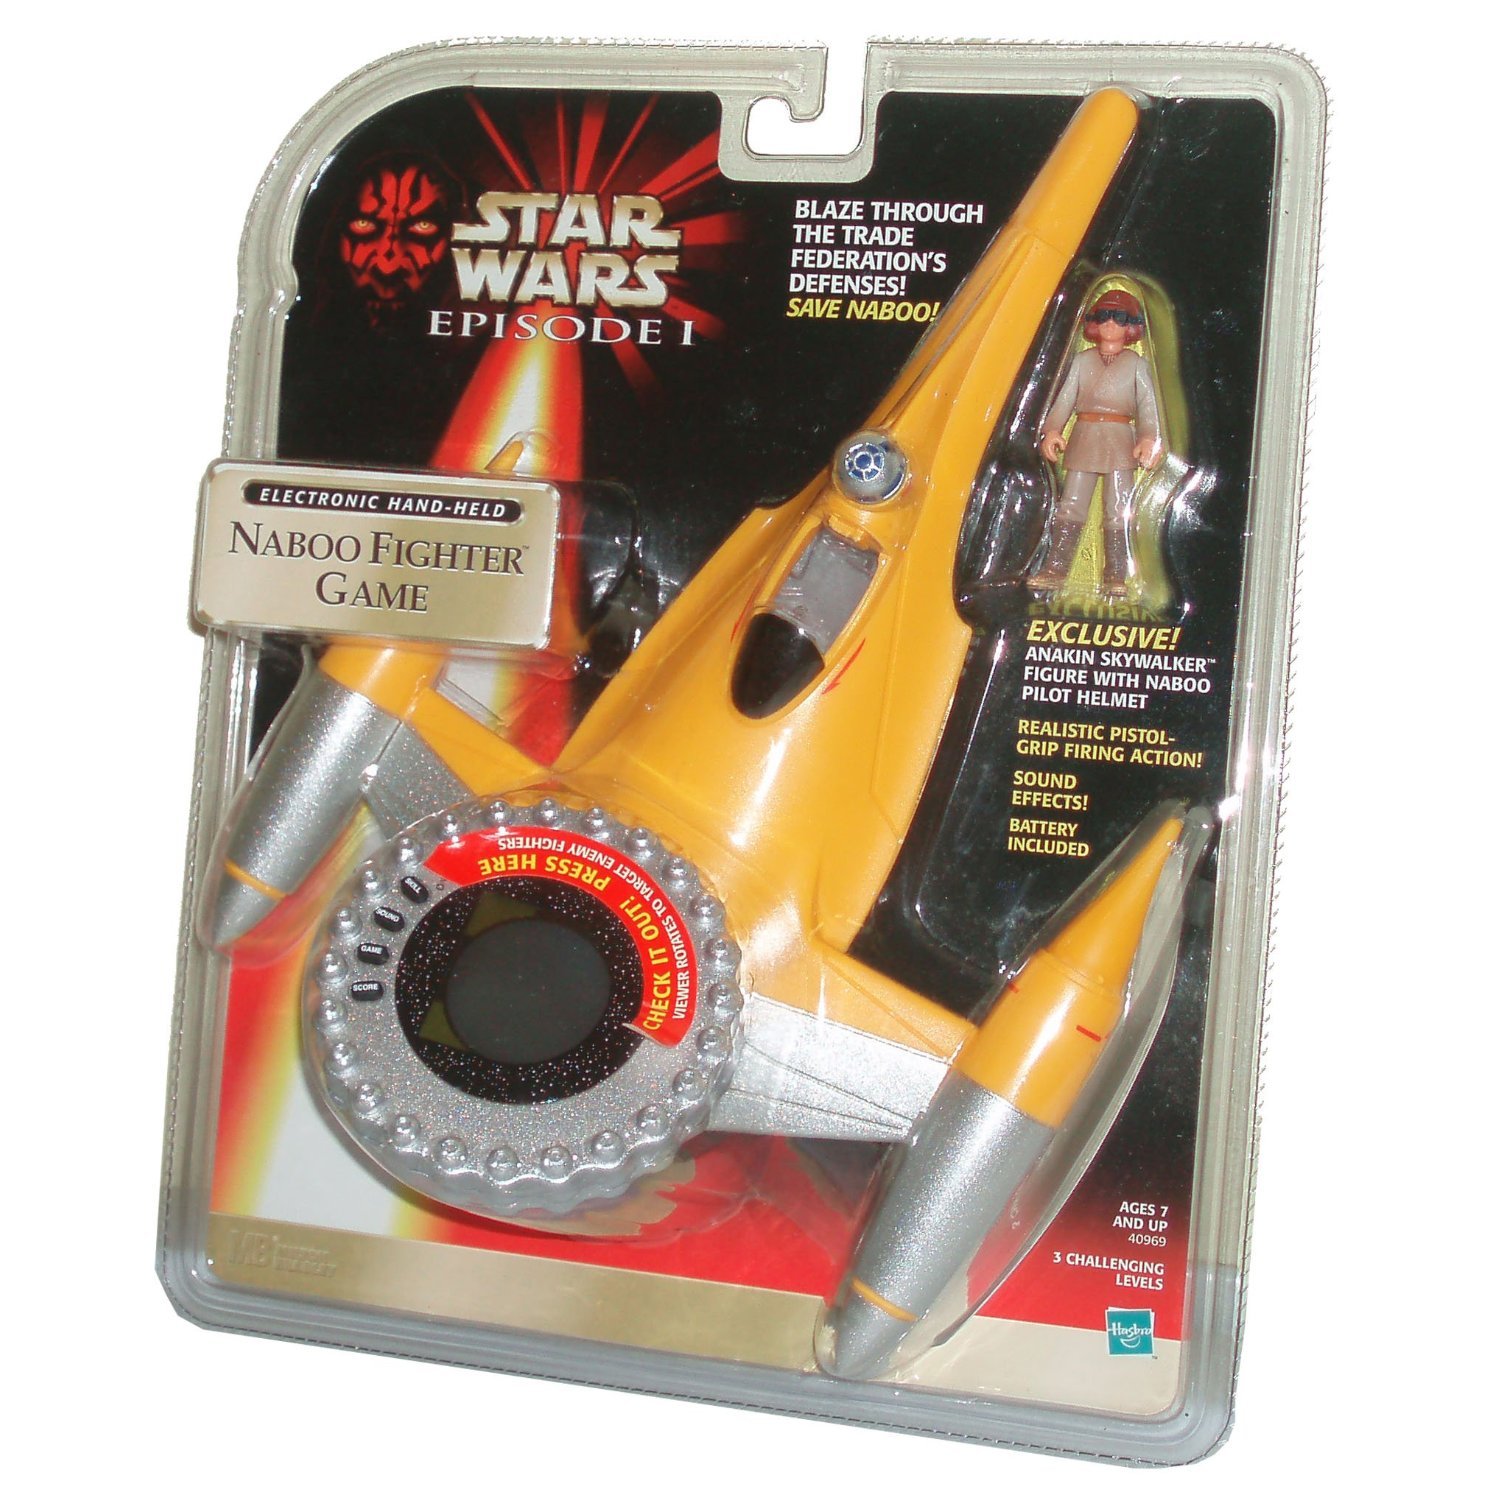 Hasbro Star Wars Episode I Electronic Hand-Held Naboo Fighter Game